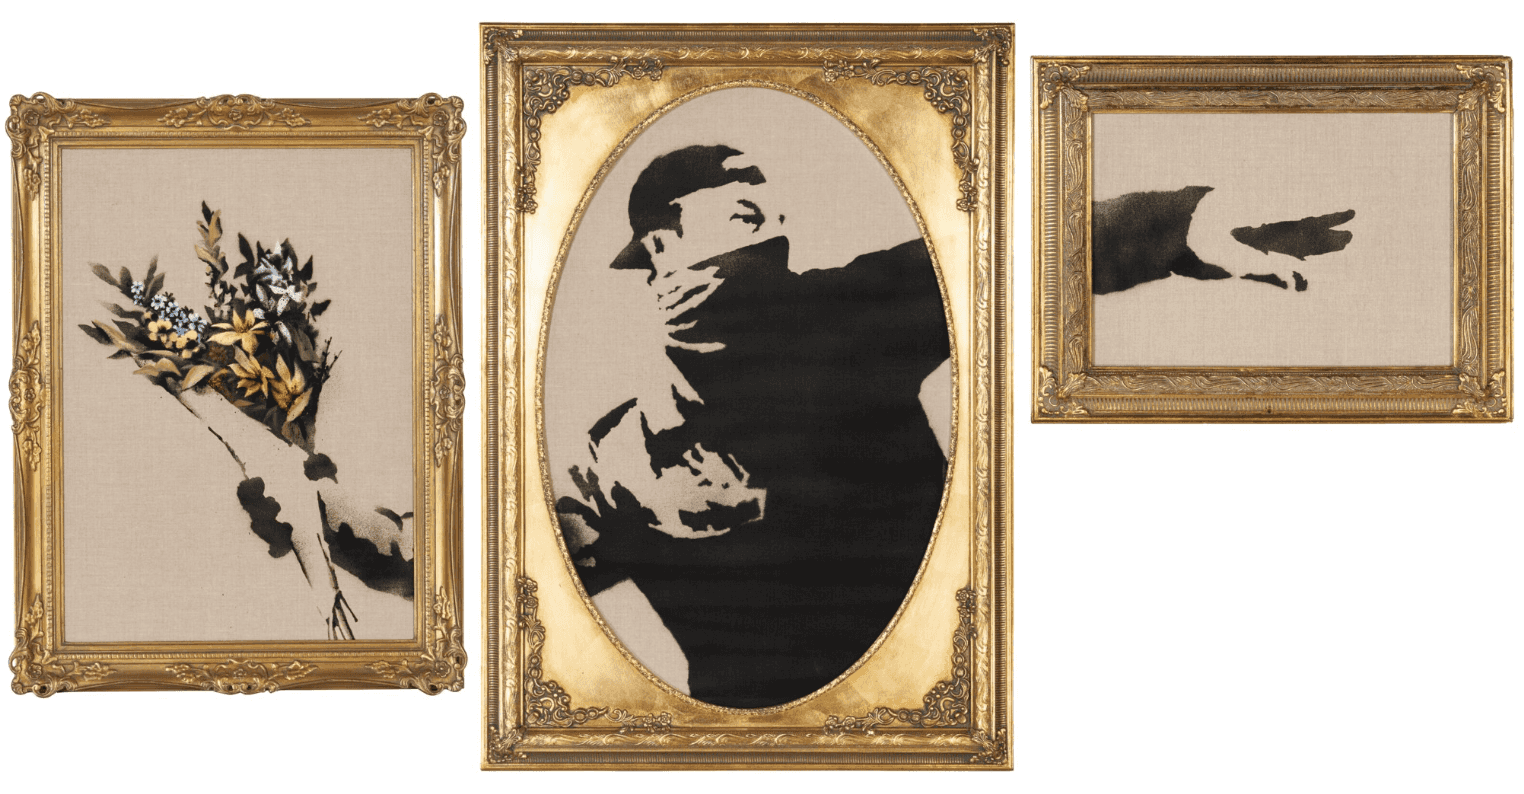 Banksy’s “Flower Thrower Triptych” valued between $1 million to $1.5 million becomes part of Christie’s Sir Elton John’s Collection.